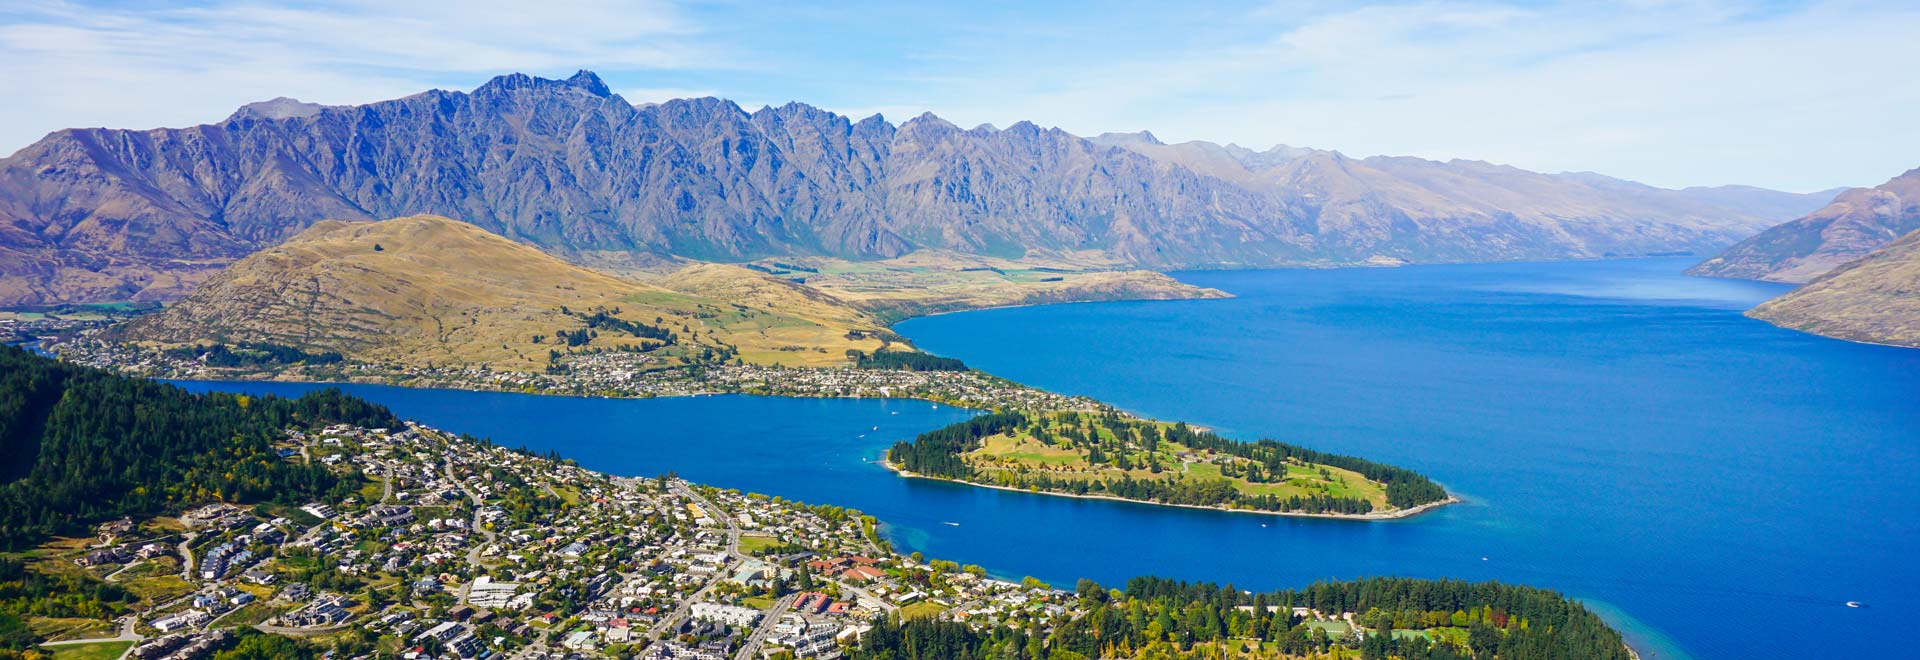 Tailor Made New Zealand: Adventure by Land, Air & Sea